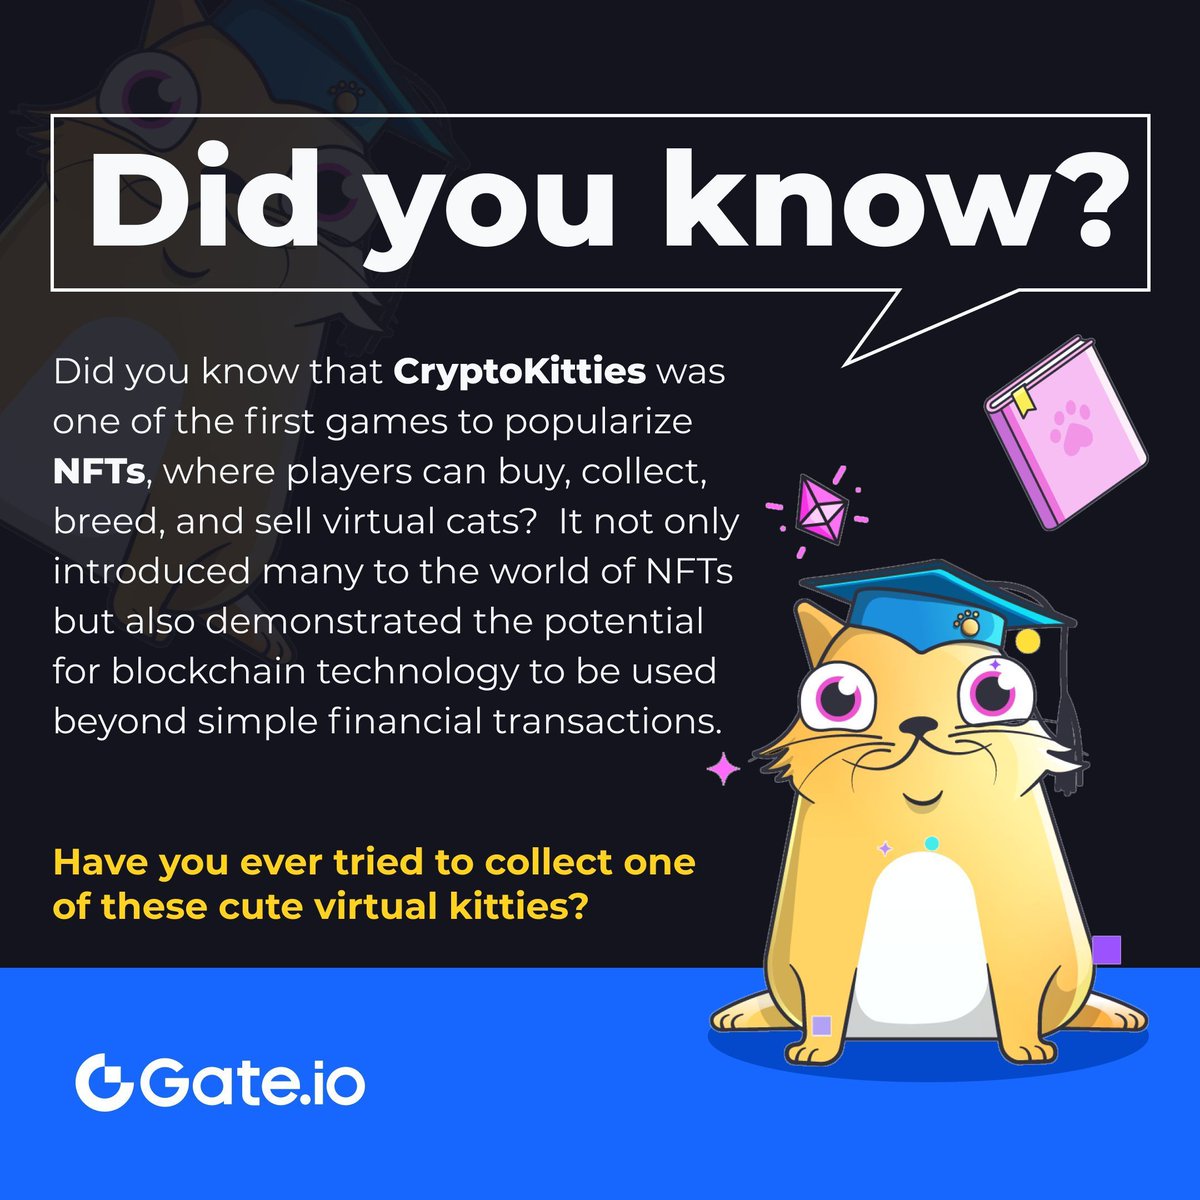 🐾 How about you? Which #blockchaingame has introduced you to the world of #NFTs? #Gateio #DidYouKnow #BlockchainGaming #NFTGaming